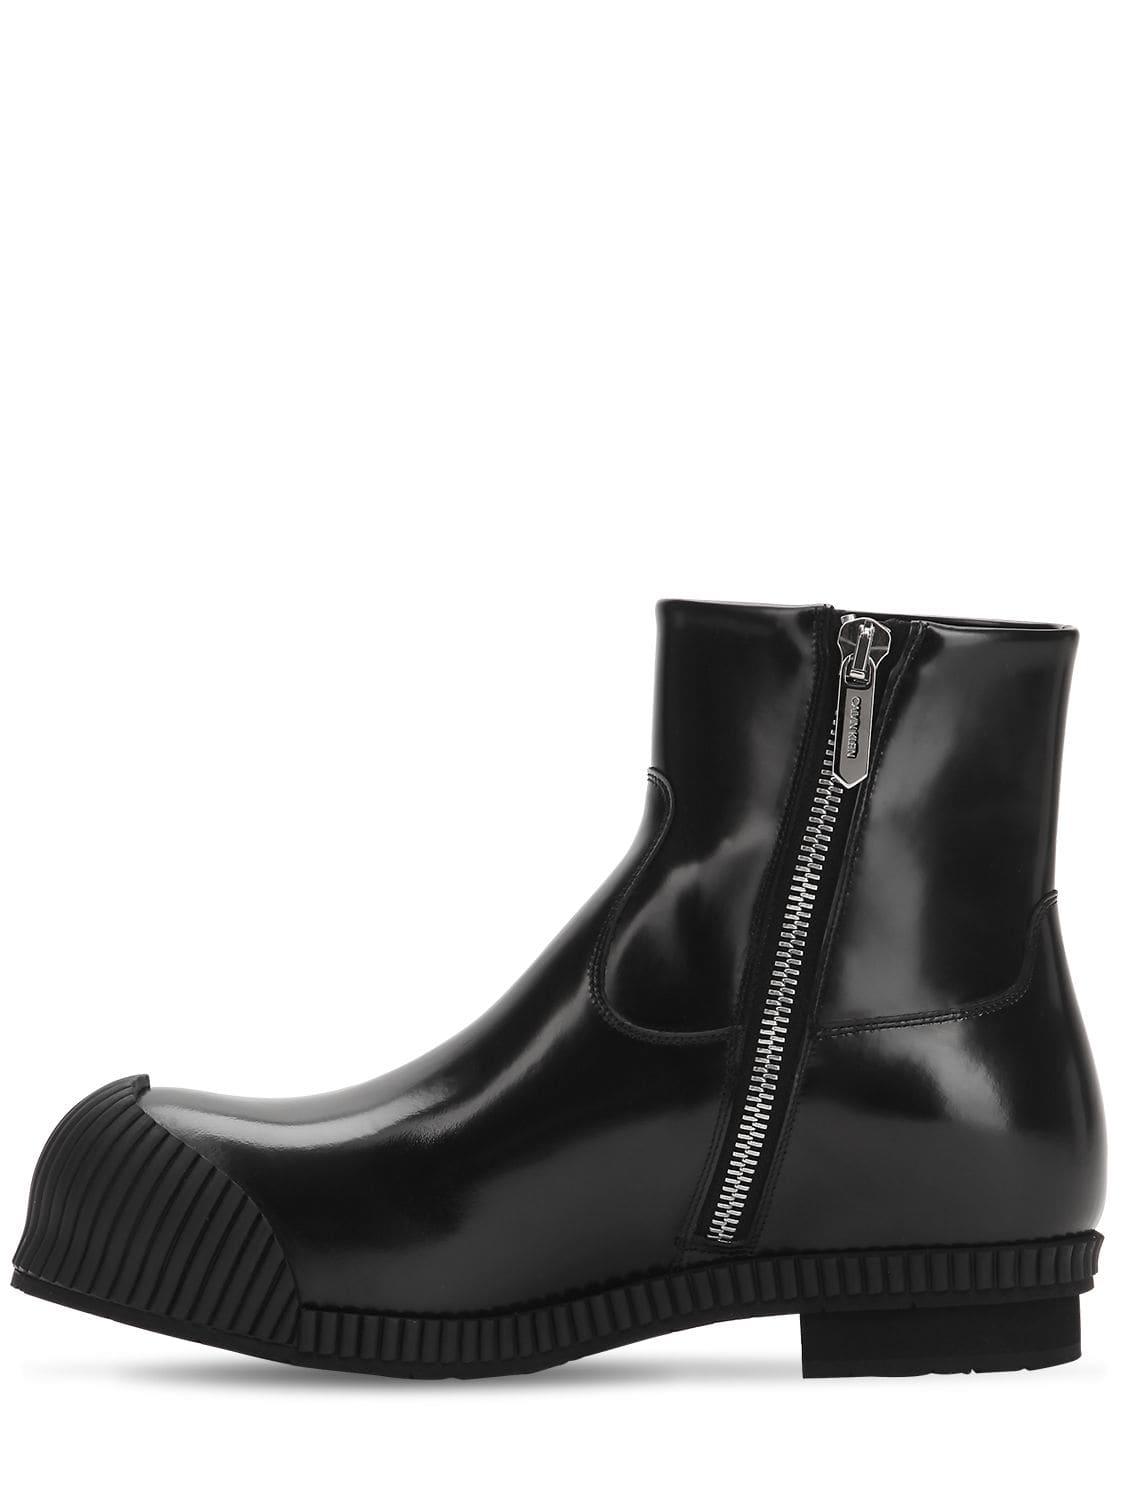 buy > calvin klein fireman boots, Up to 67% OFF